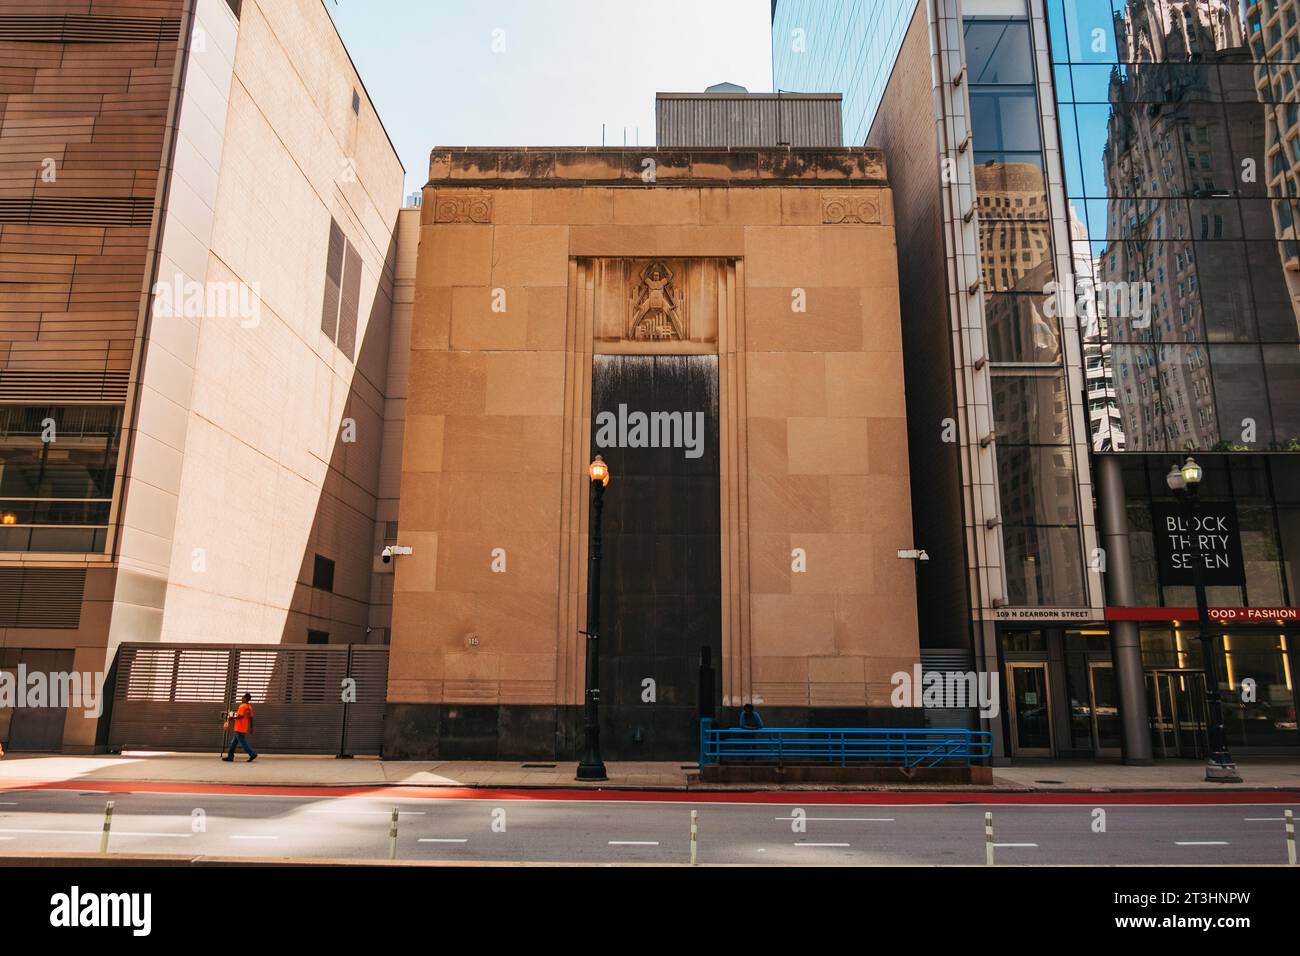 a ComEd Power Substation on N Dearborn St, Chicago. Designed in the art deco style of the era. Features a 'spirit of electricity' carving on top Stock Photo